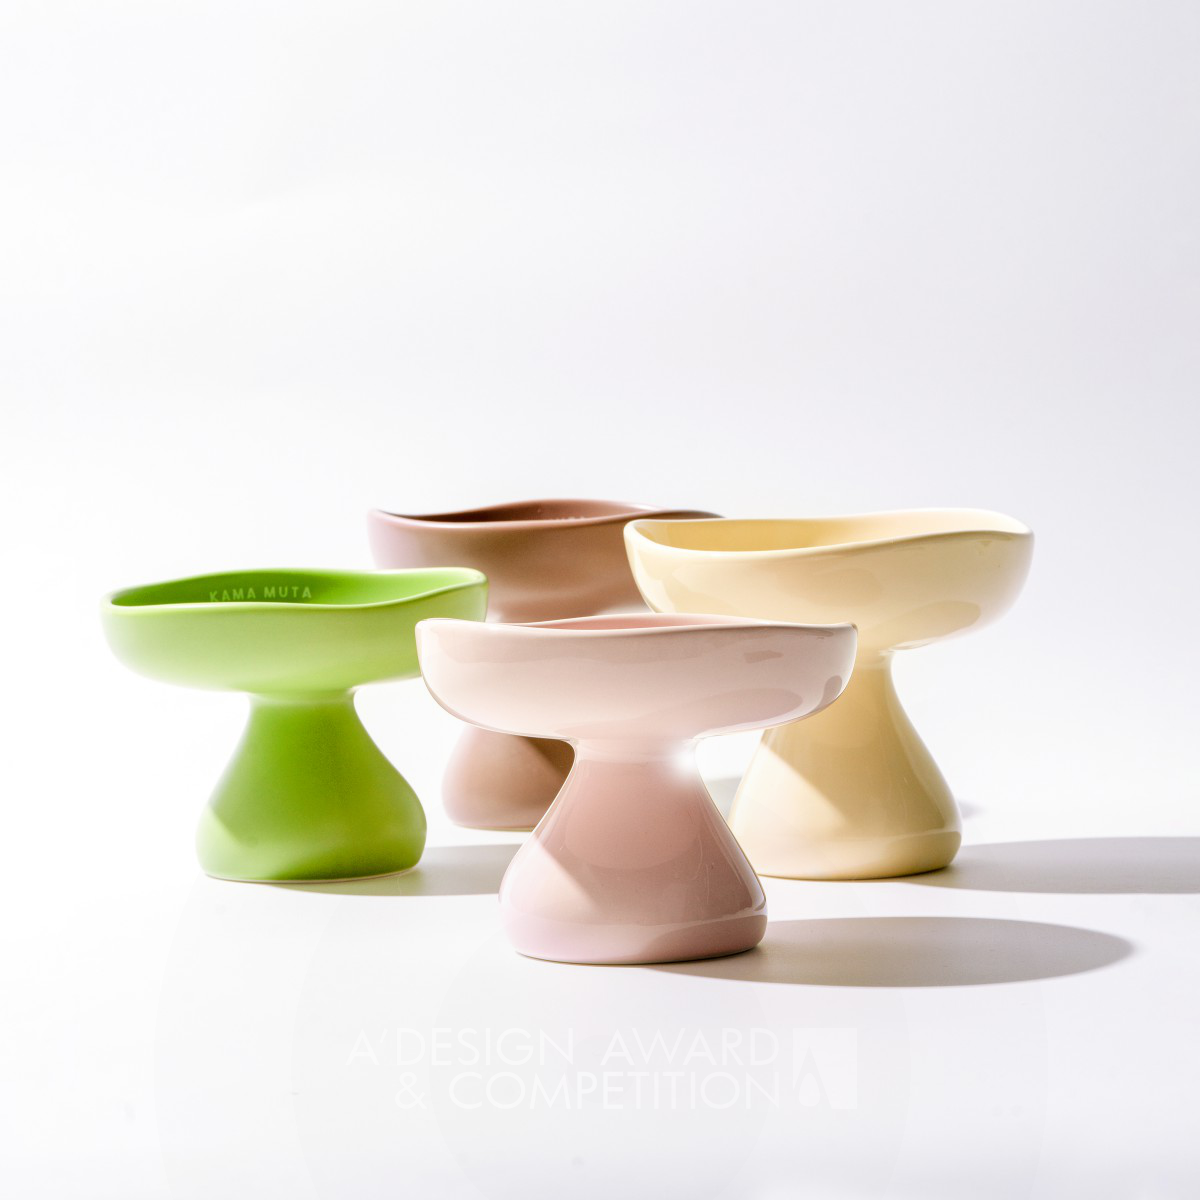 Chen Liang wins Bronze at the prestigious A' Pet Care, Toys, Supplies and Products for Animals Design Award with Mushroom Pet Bowl.